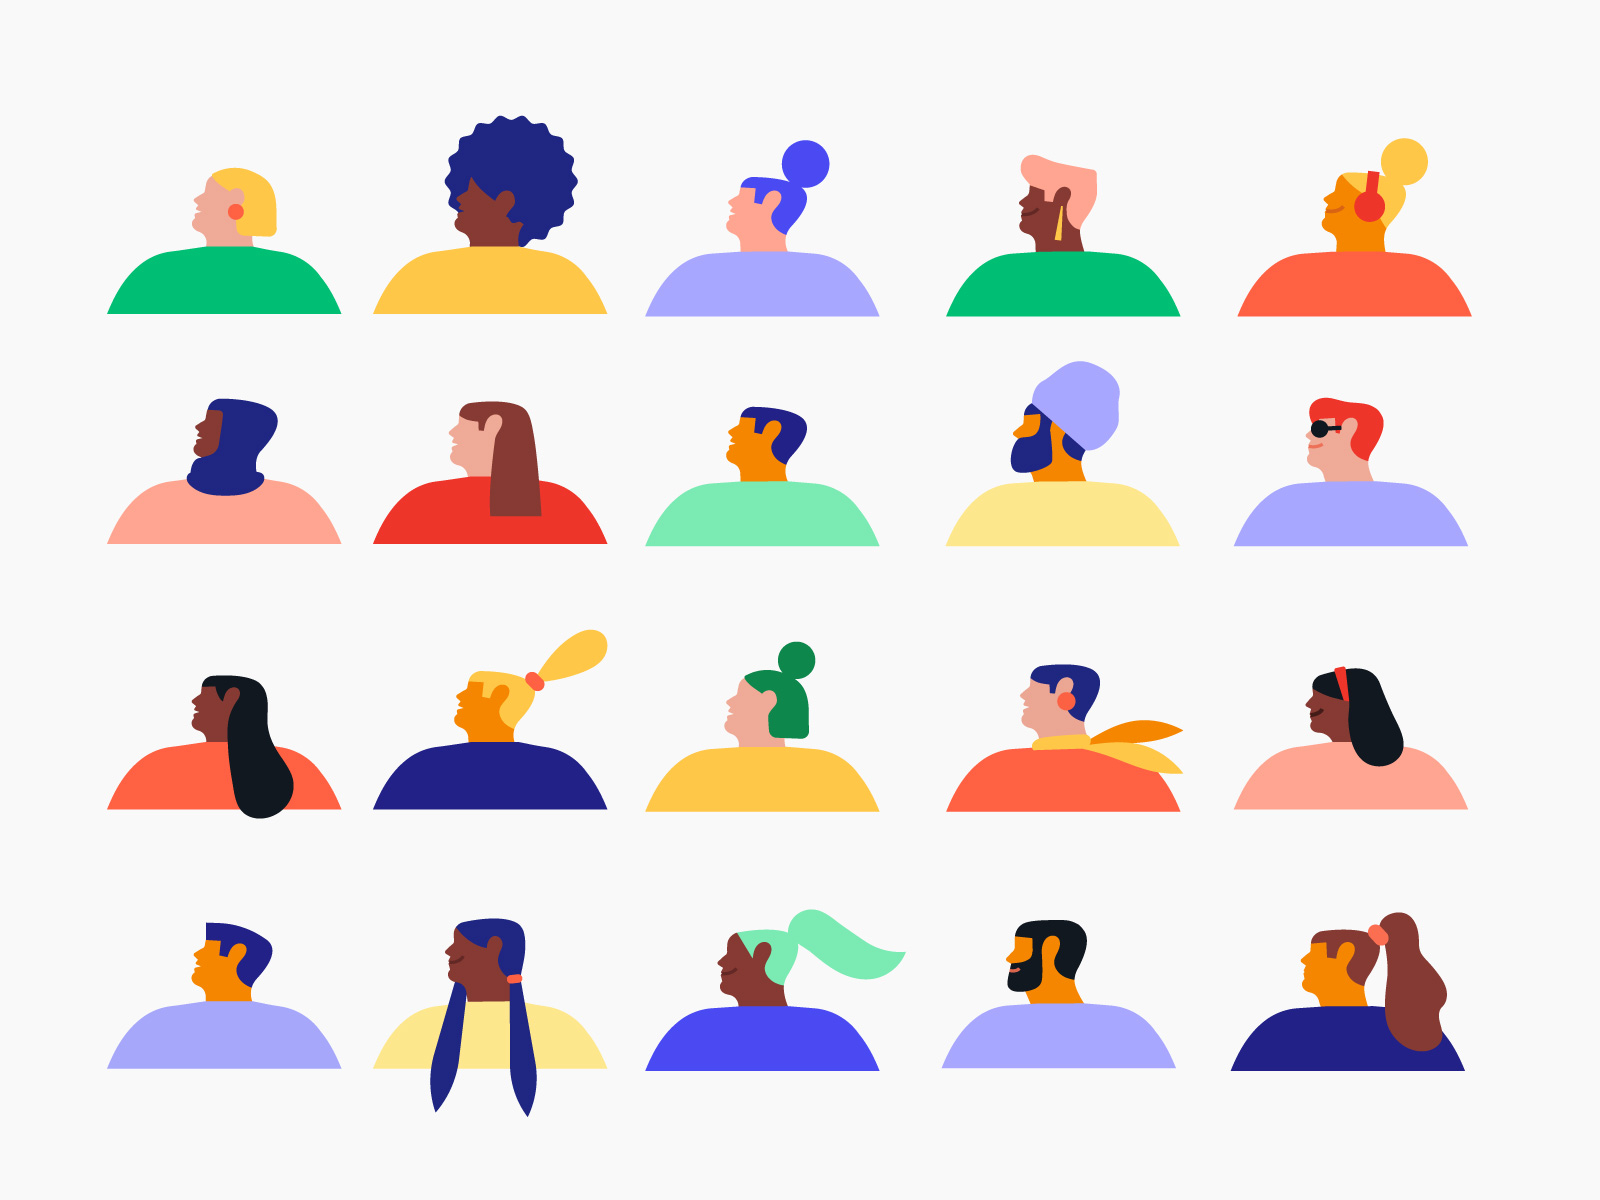 Diversity through characters character character illustration color colorful design difference diversity geometric hair hairstyle hairstyles head illo illustration illustration syste inclusion inclusivity minimal shapes simplistic